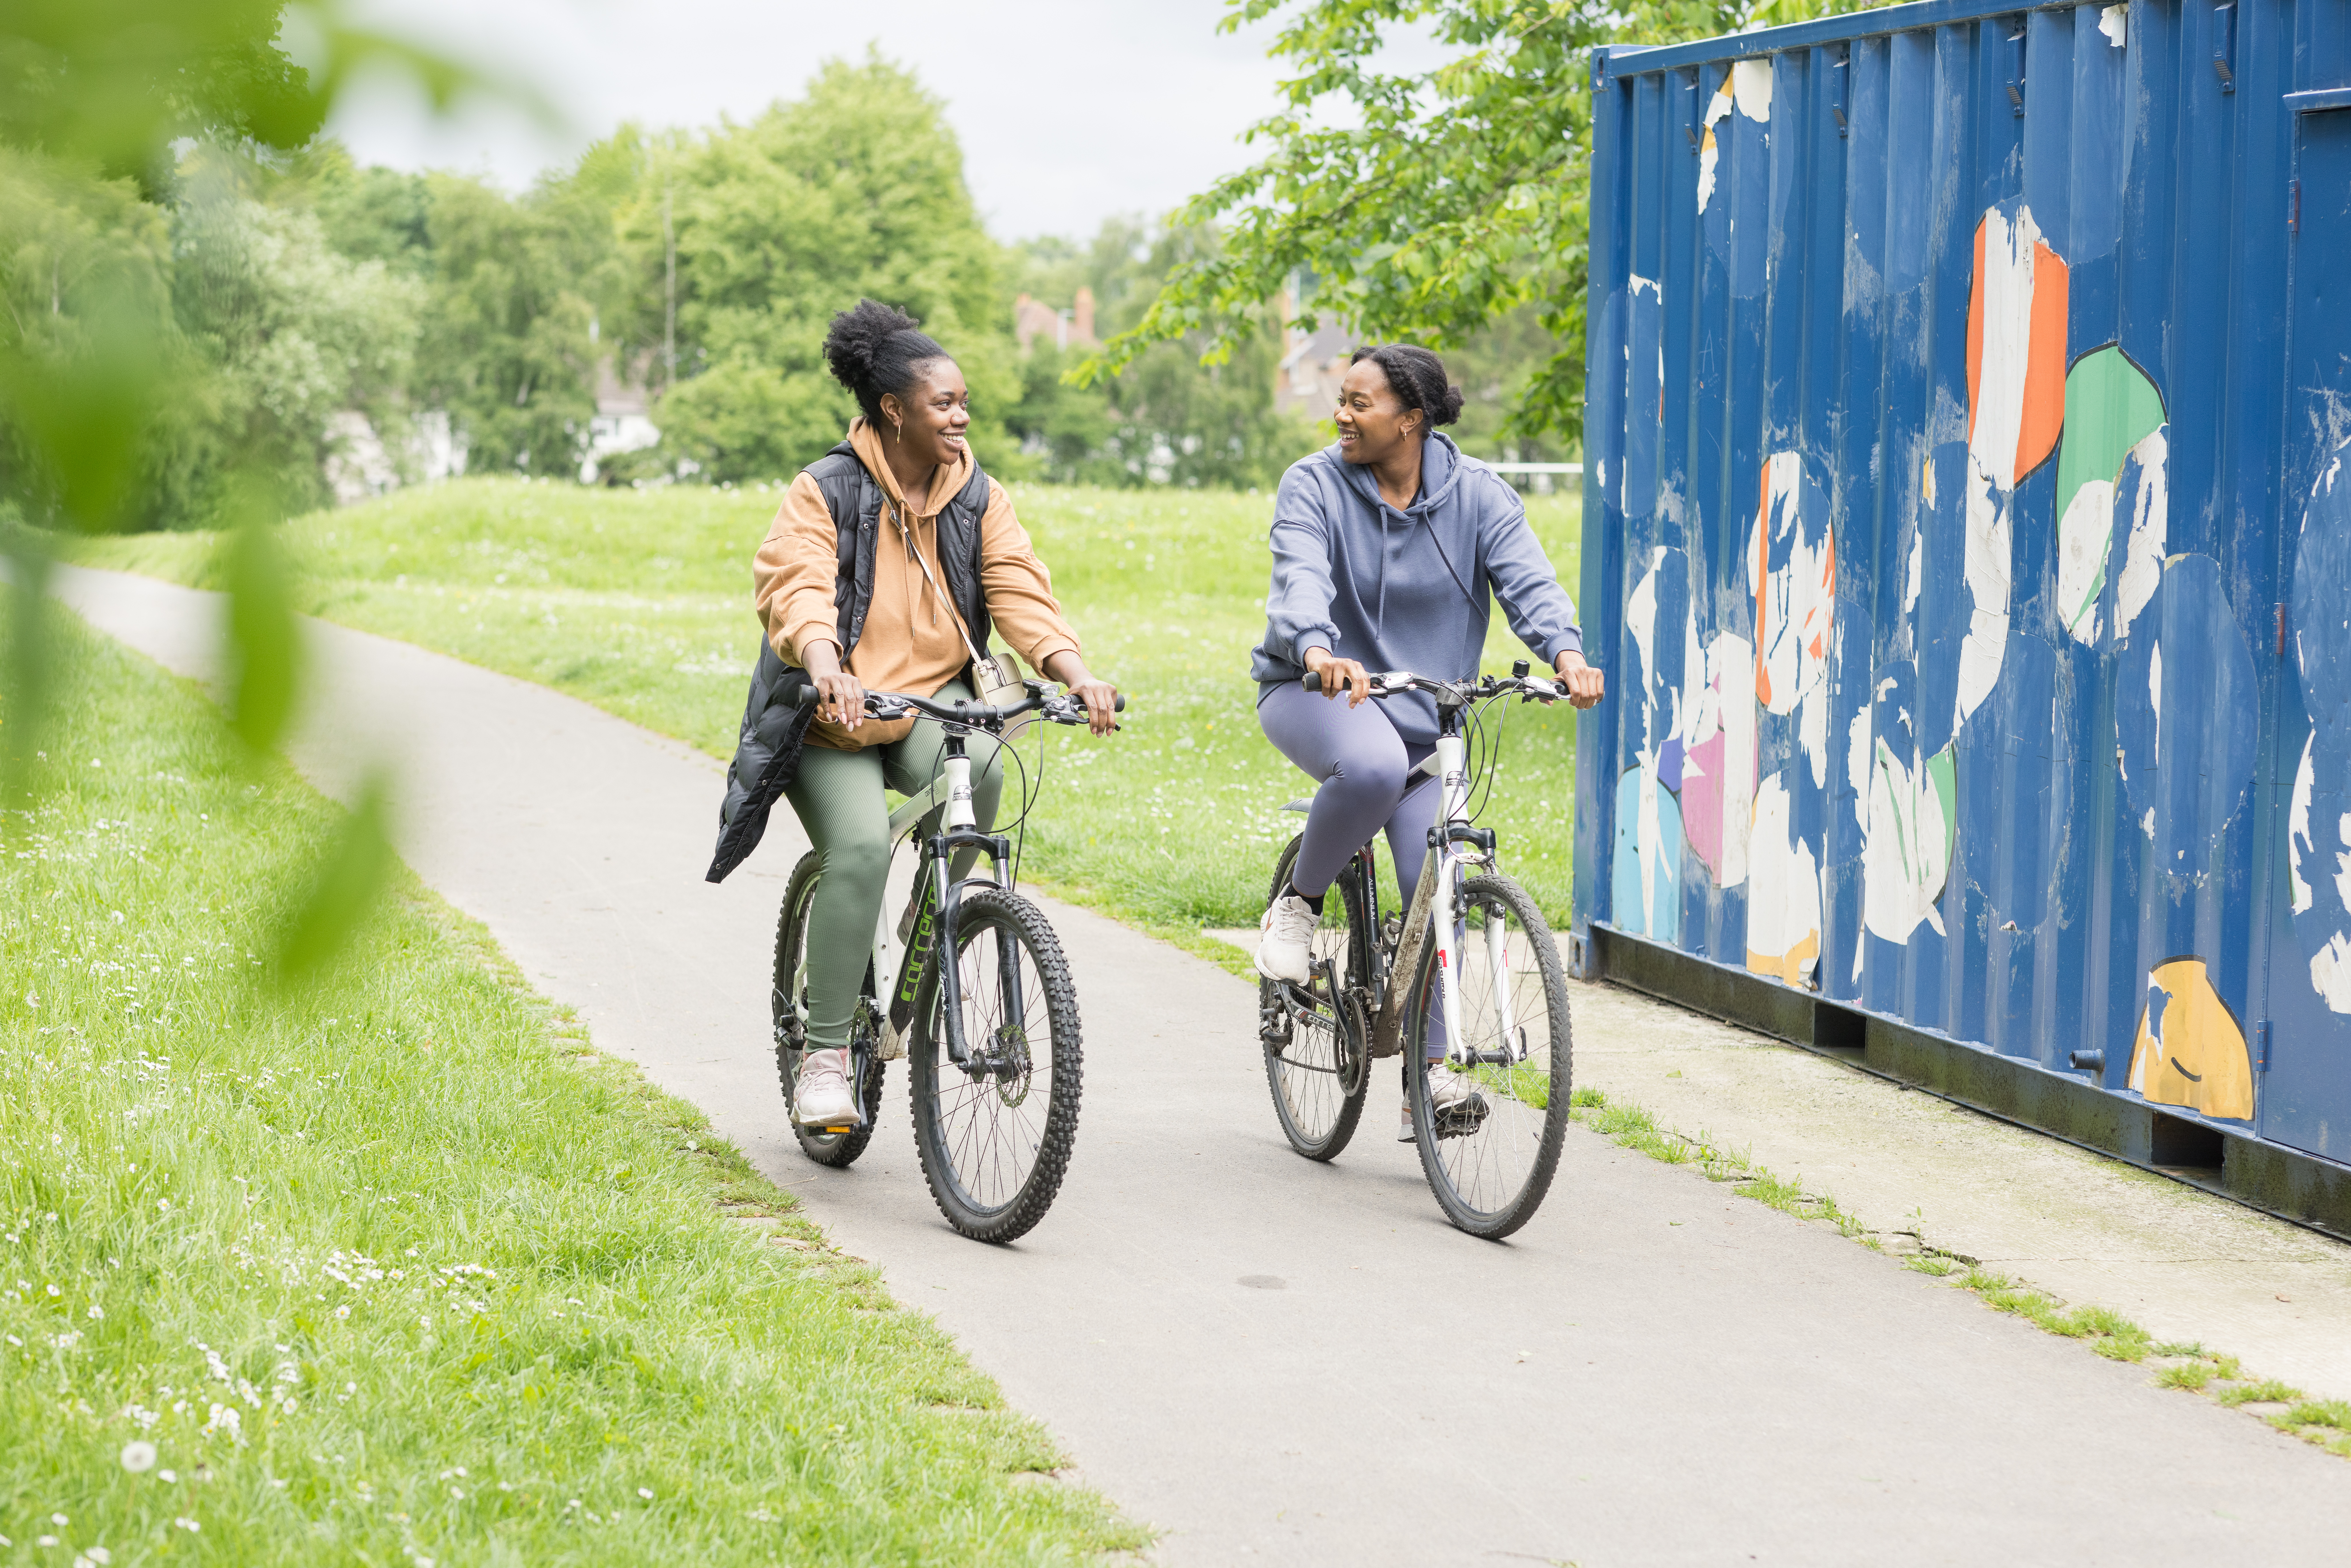 Two women cycling on a path in a park with a shipping container on their left